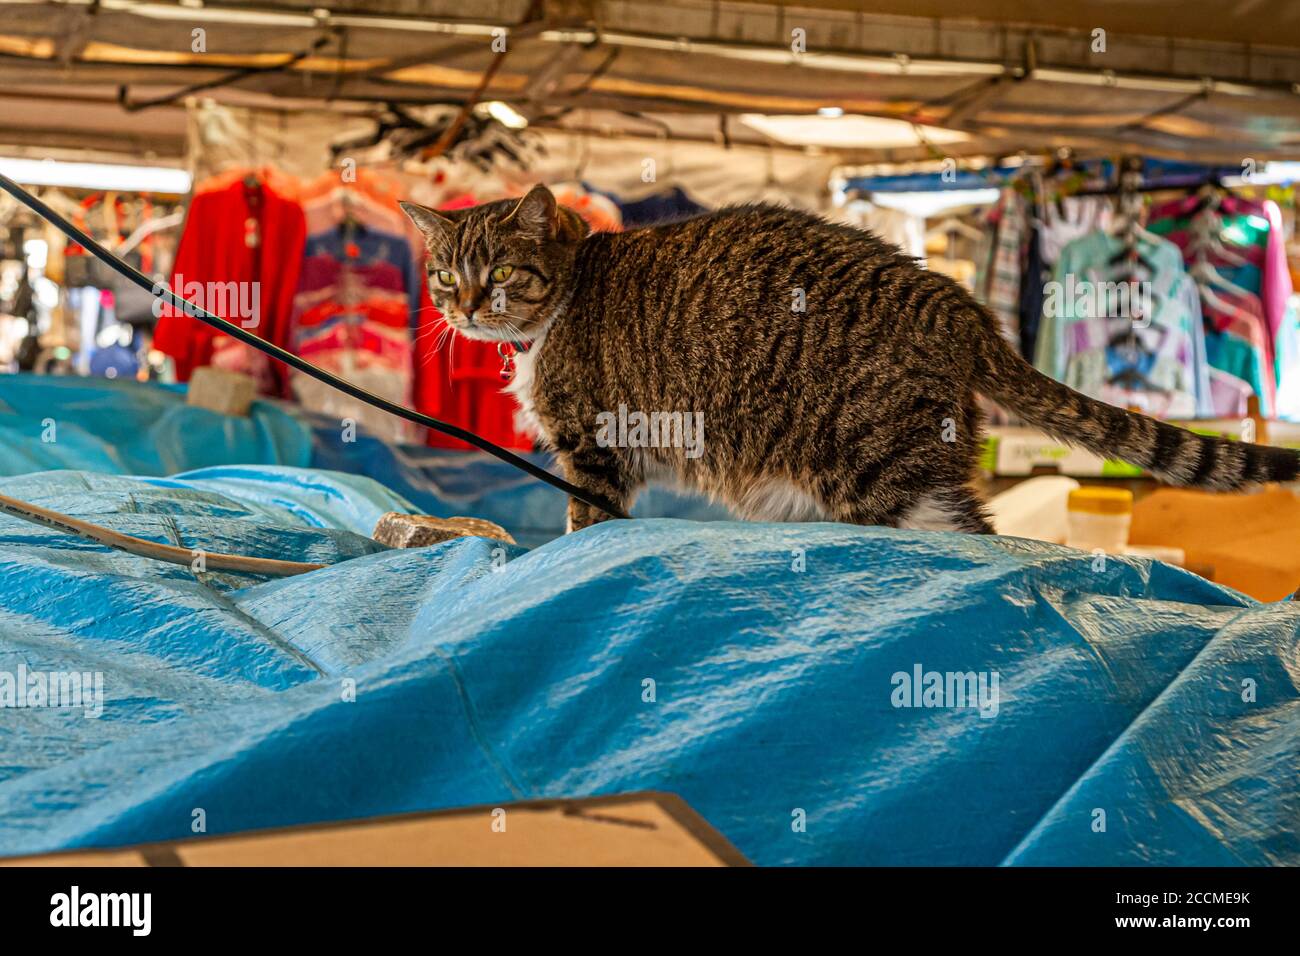 Bargain hunting instead of mouse hunting: cat at a clothing market in Poznan, Poland Stock Photo